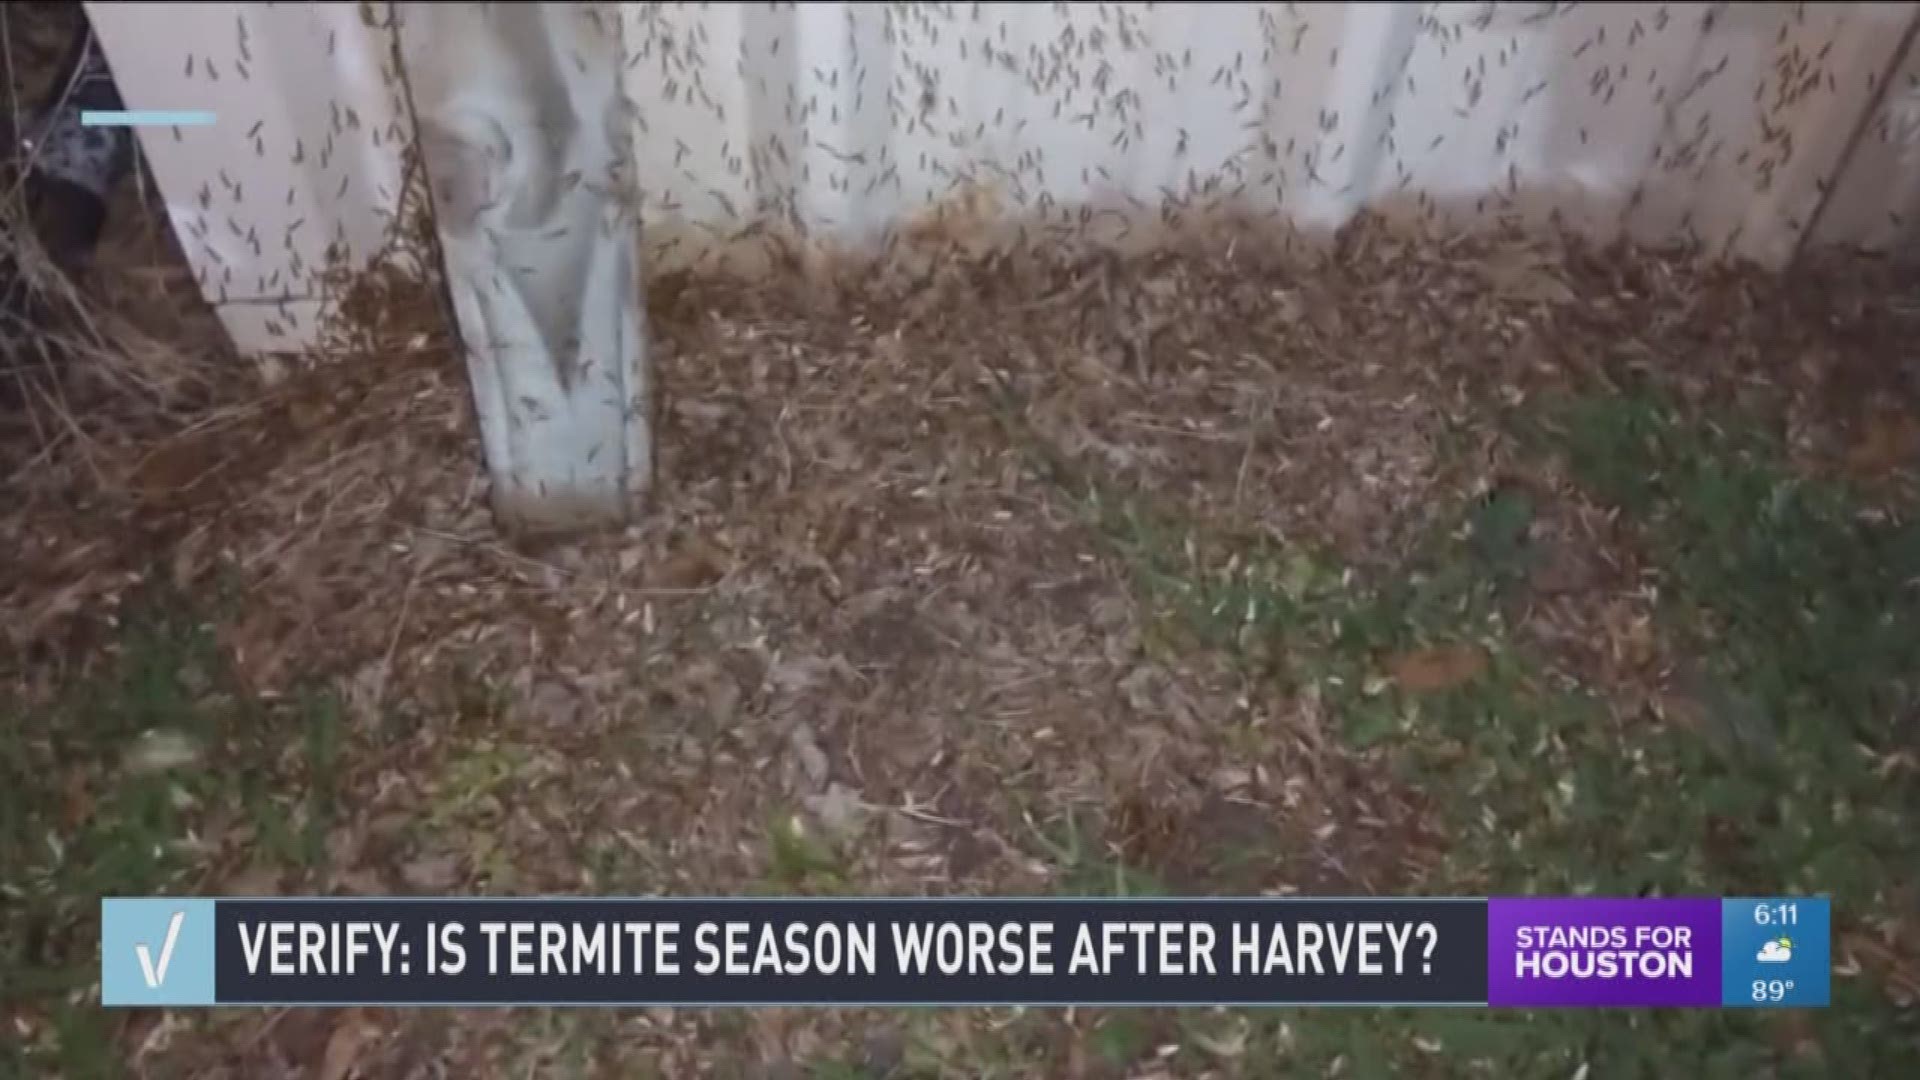 Our Verify team looked into a claim made on social media where people are asking, "Are there more termites in the Houston area because of Hurricane Harvey?"